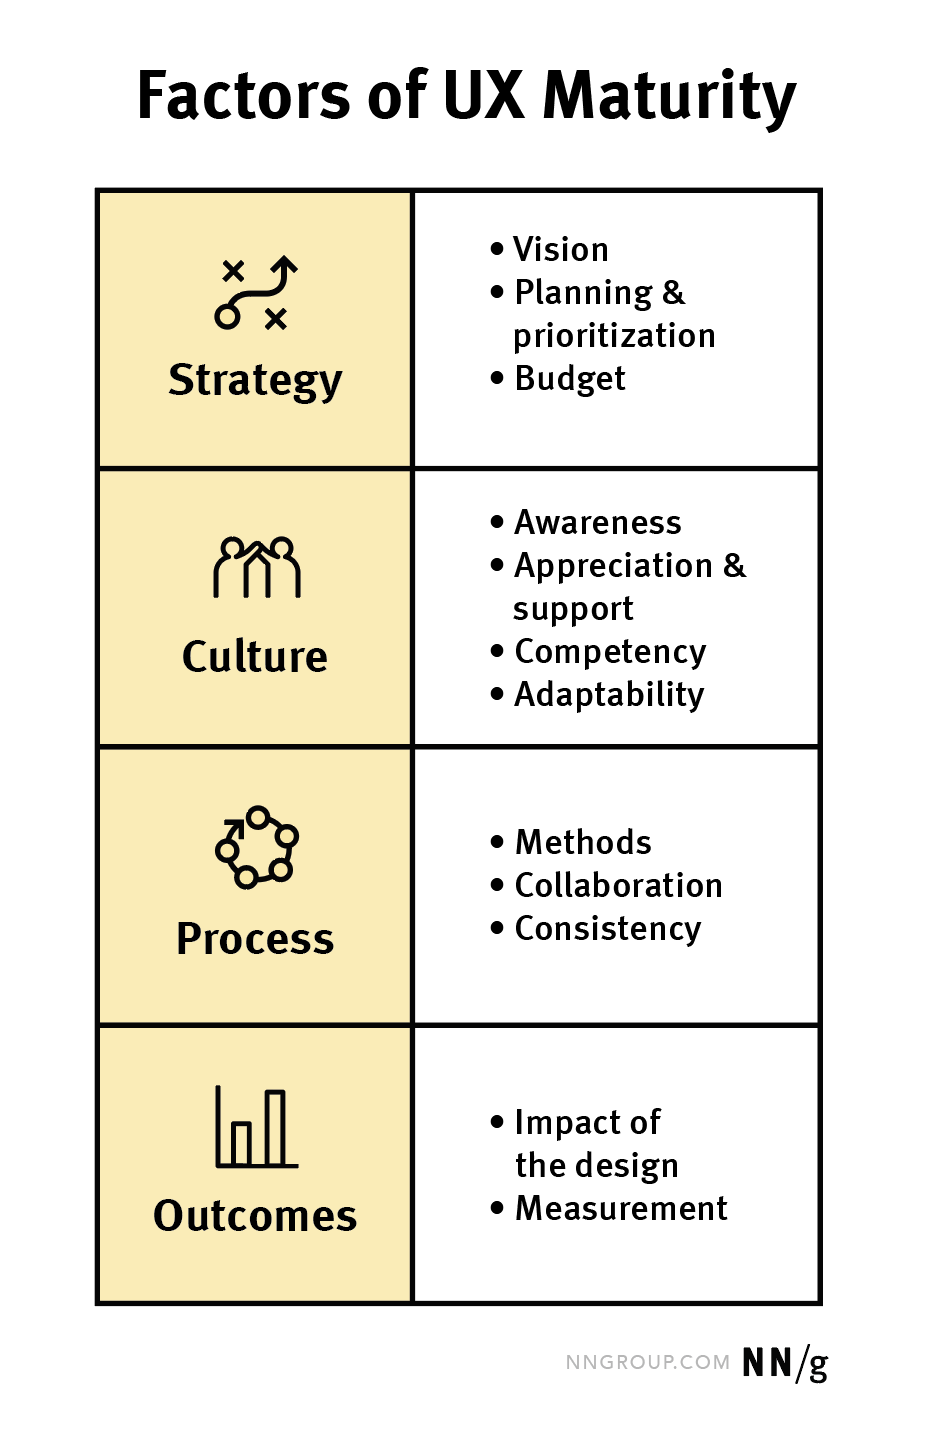 Factors of UX Maturity: Strategy, Culture, Process, and Outcomes